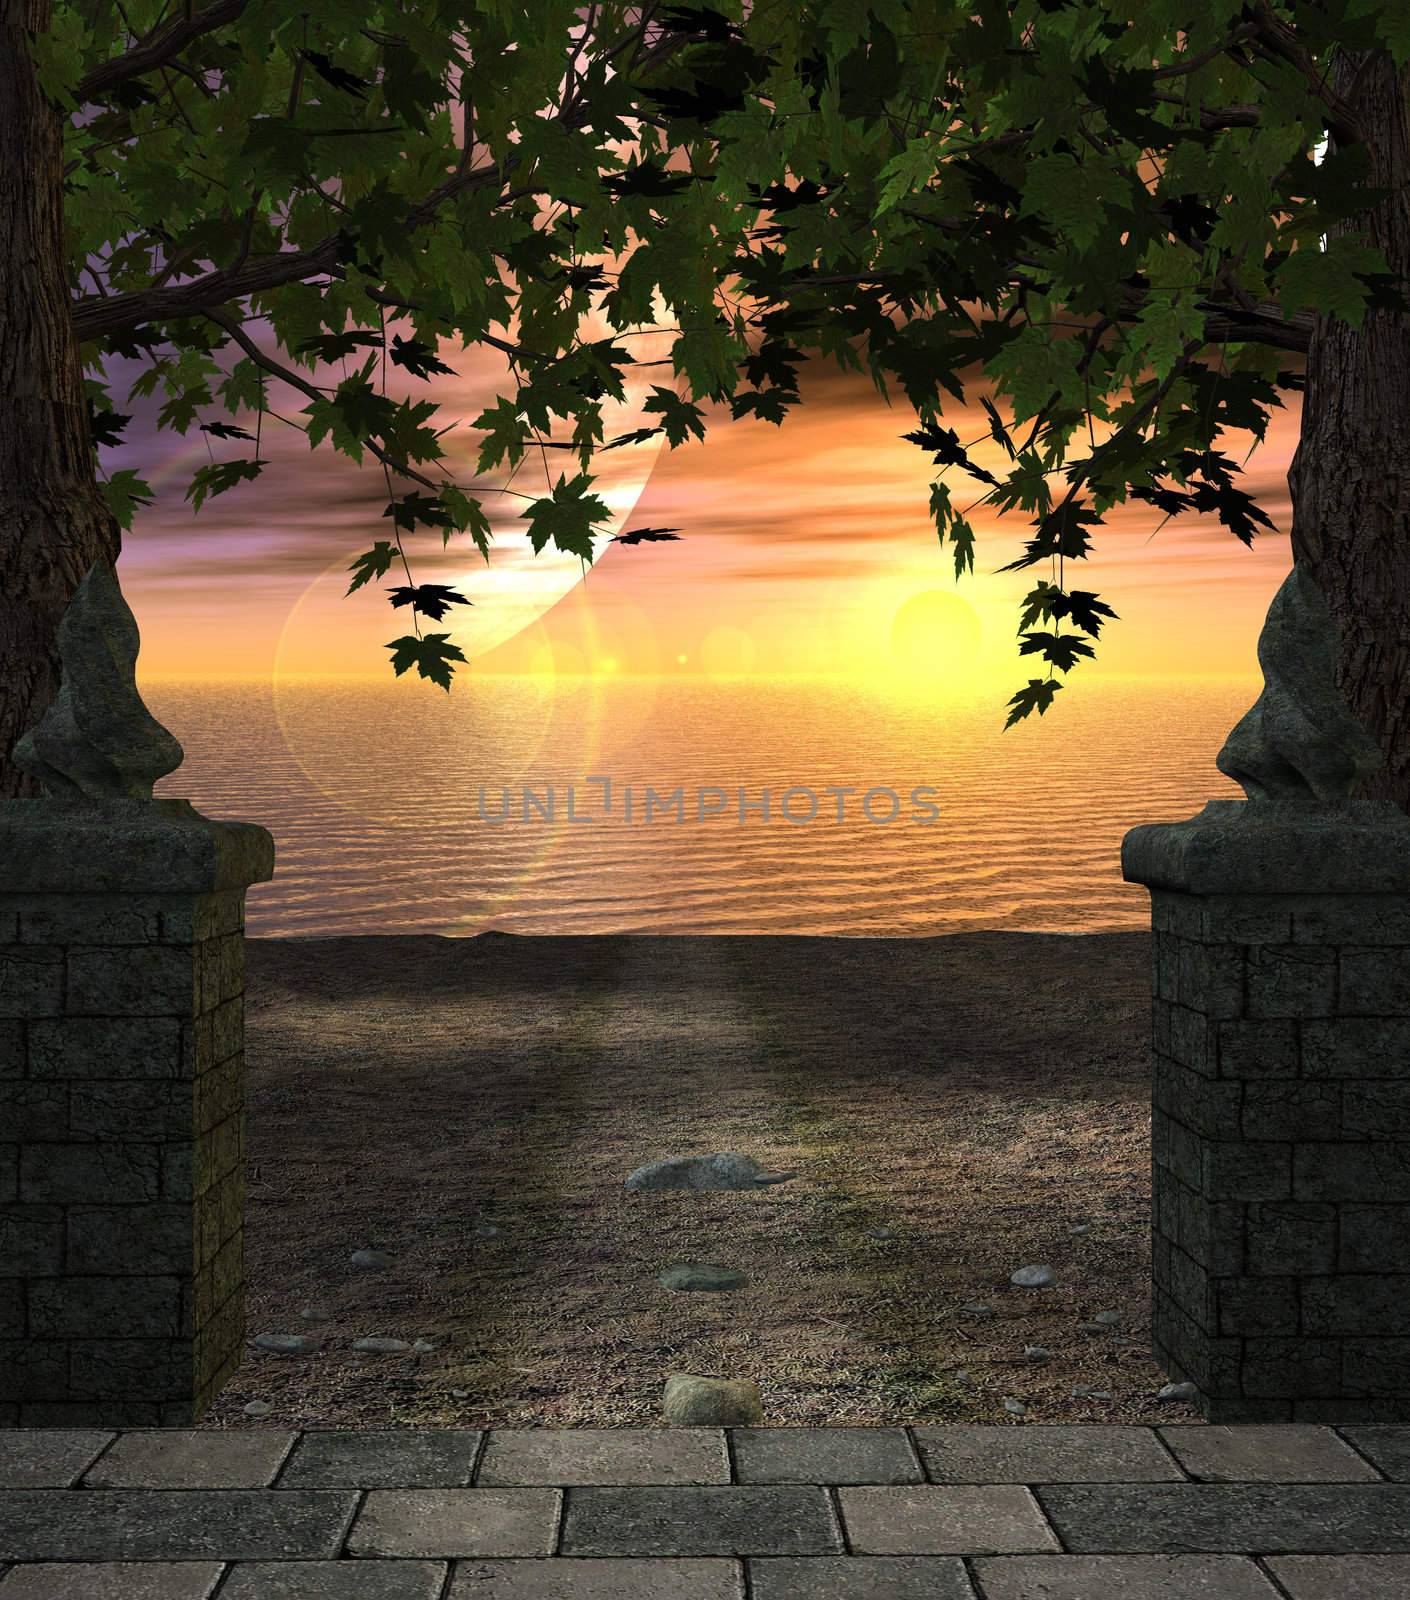 Sunset Outdoor Background by kathygold